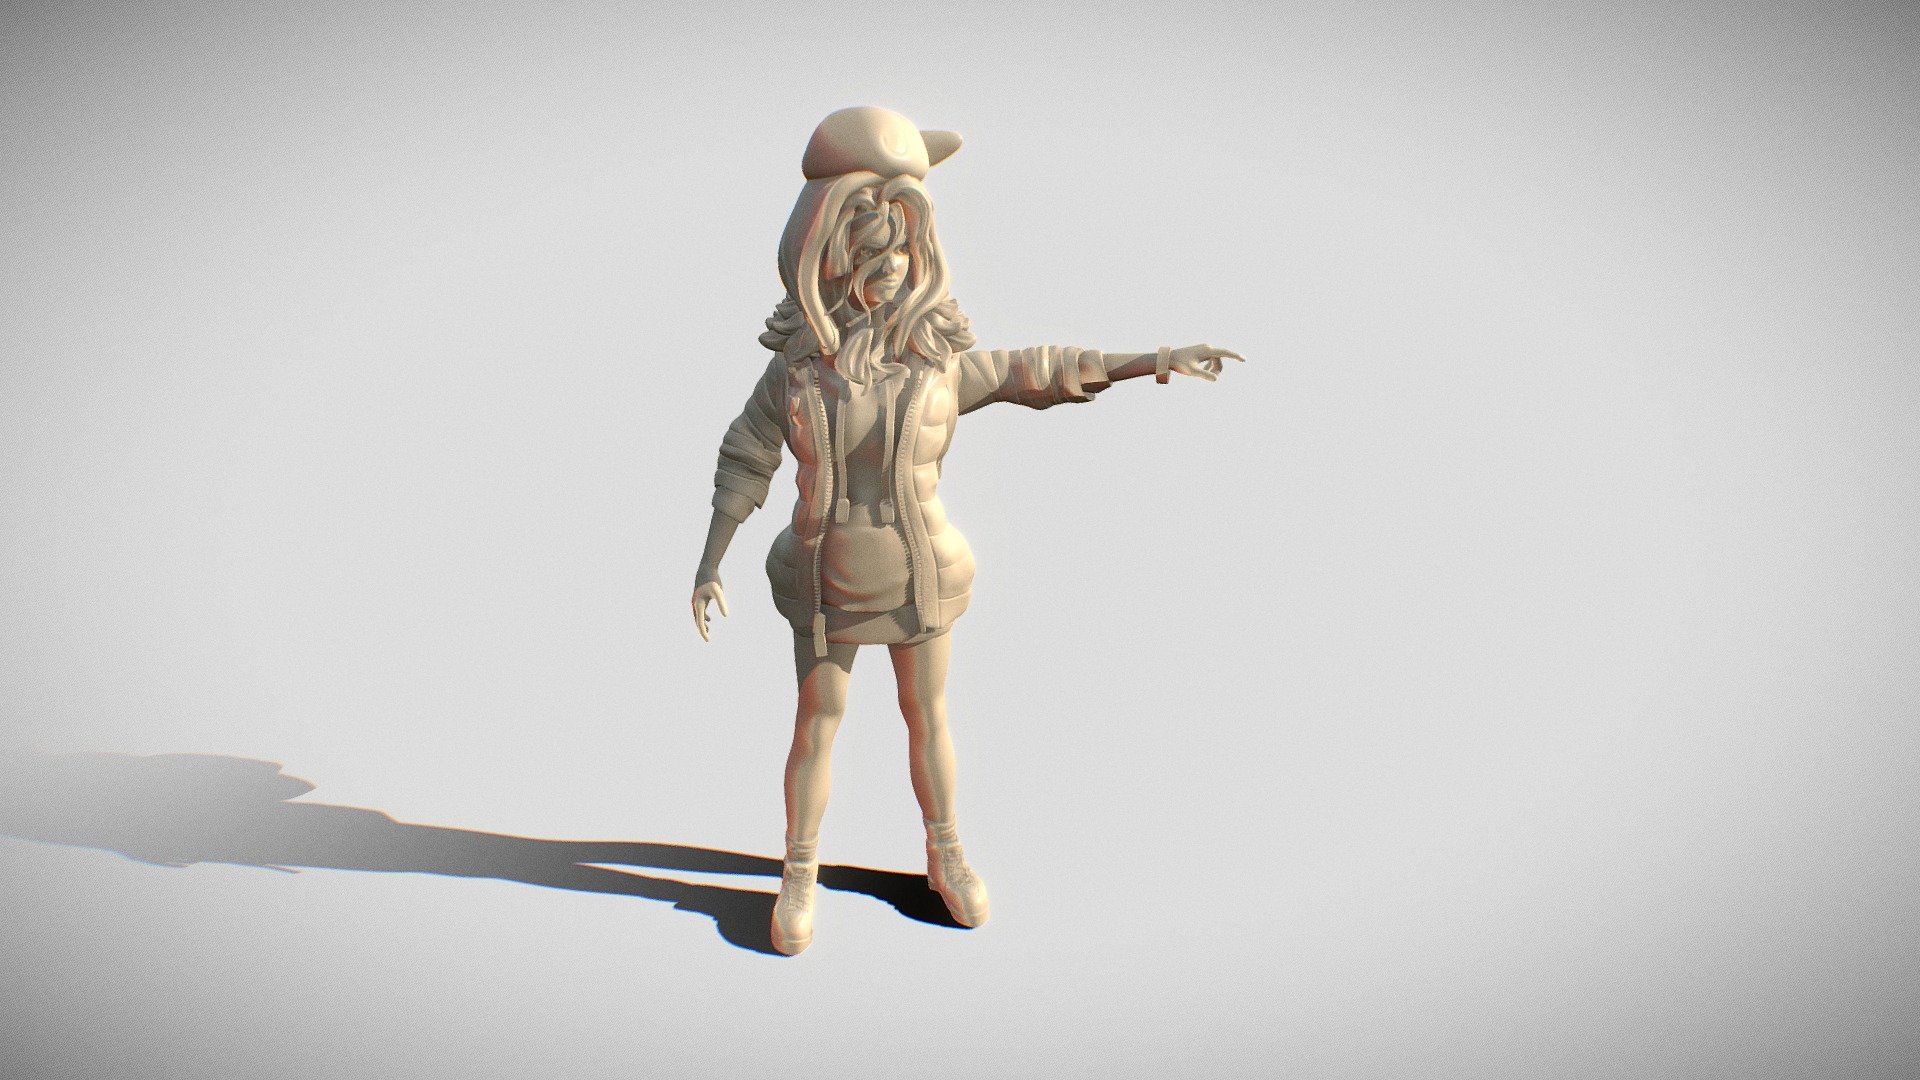 Main Female Character fir the game I am creating concepts for for my senior thesis - Maddy - 3D model by rivercull 3d model